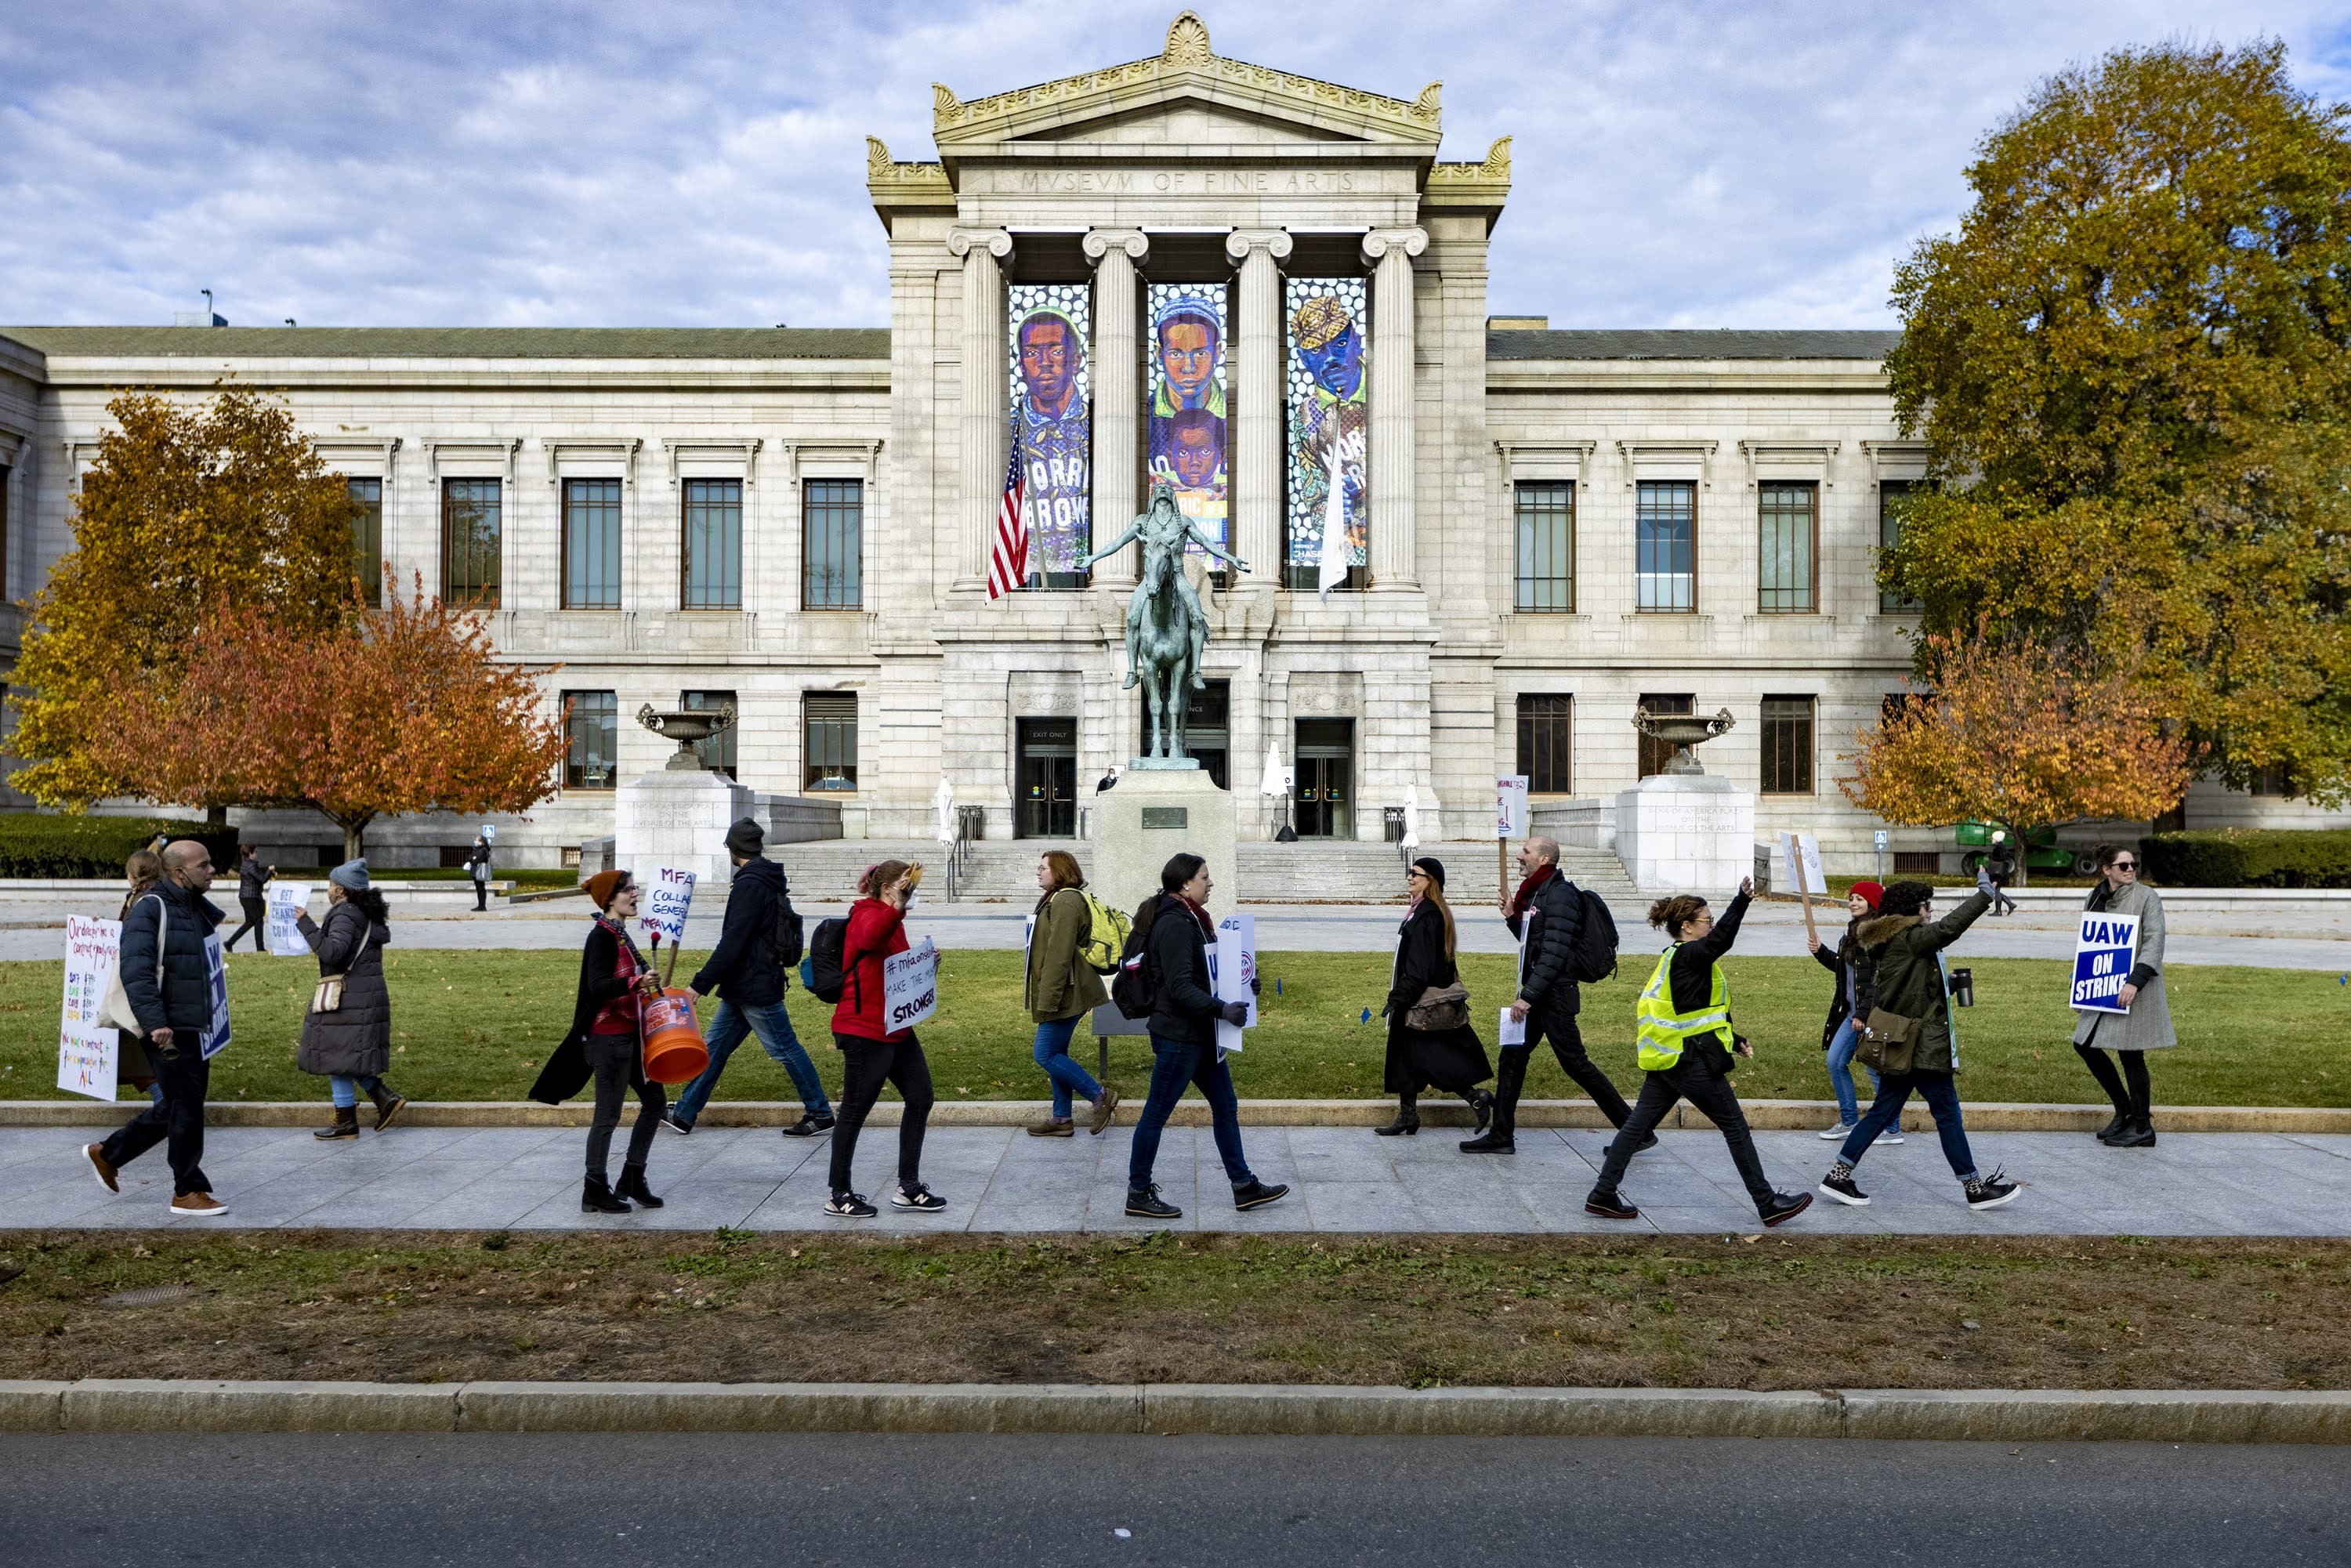 Museum staff and their supporters picket outside of the front entrance of the Museum of Fine Arts on Huntington Avenue demanding livable wages and decent working conditions. (Jesse Costa/WBUR)